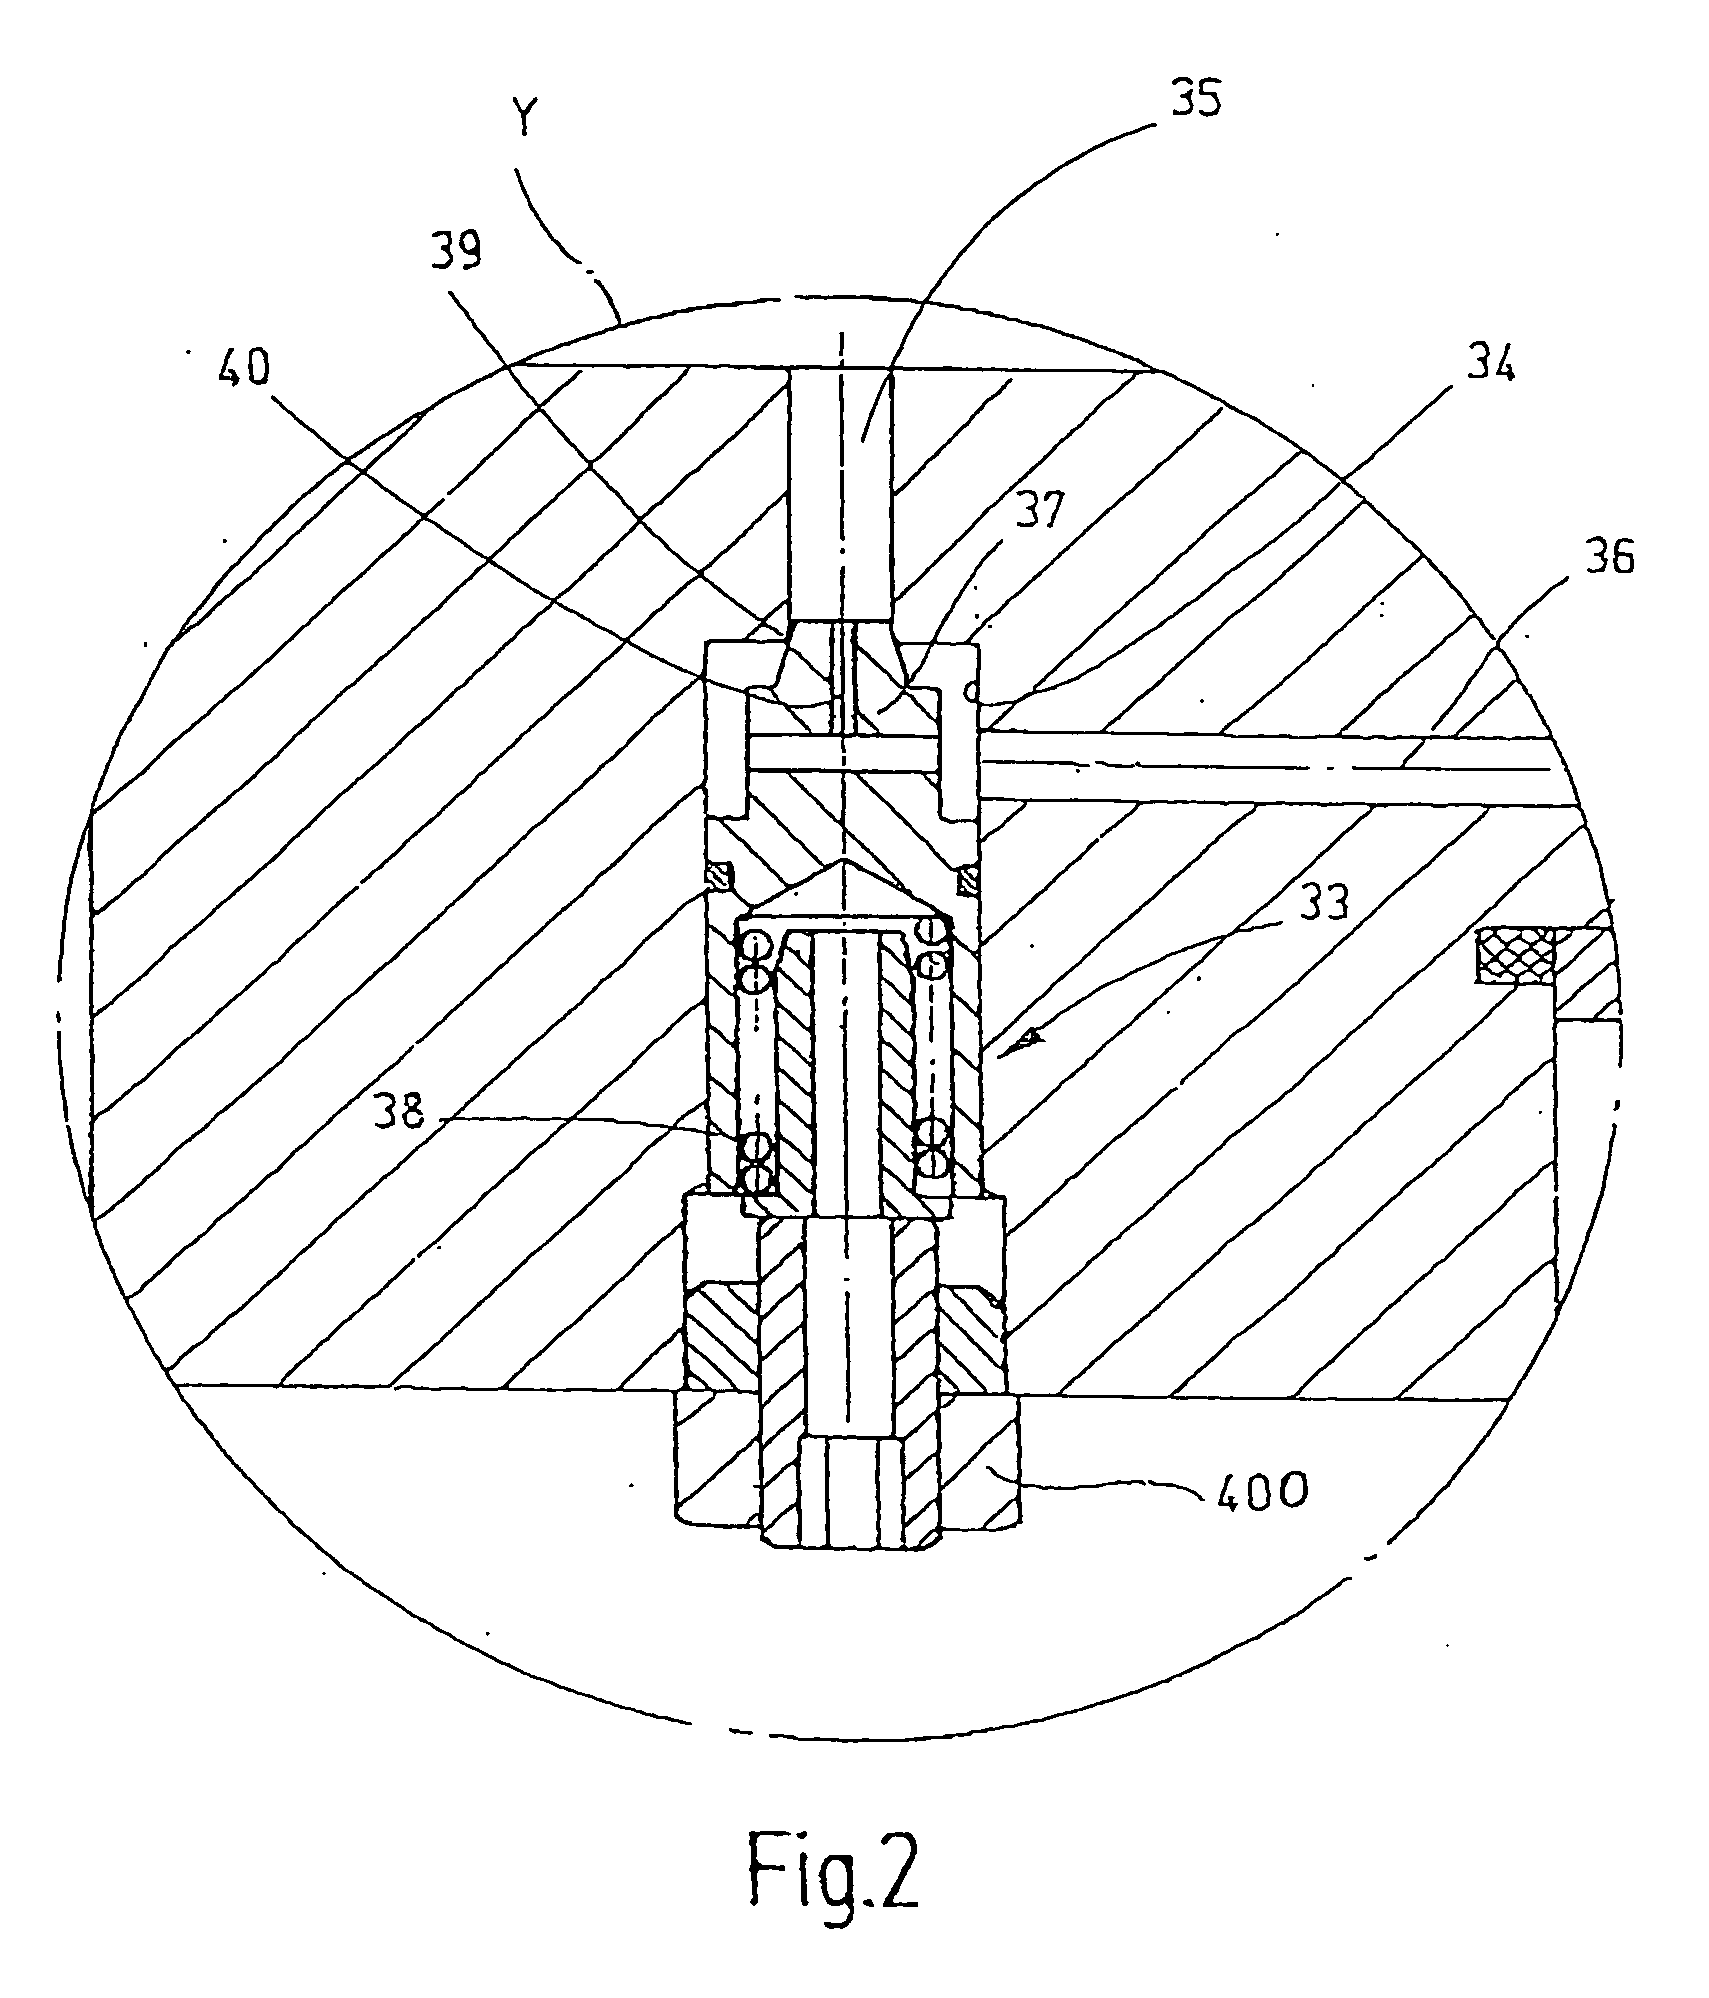 Working cylinder with terminal position damping